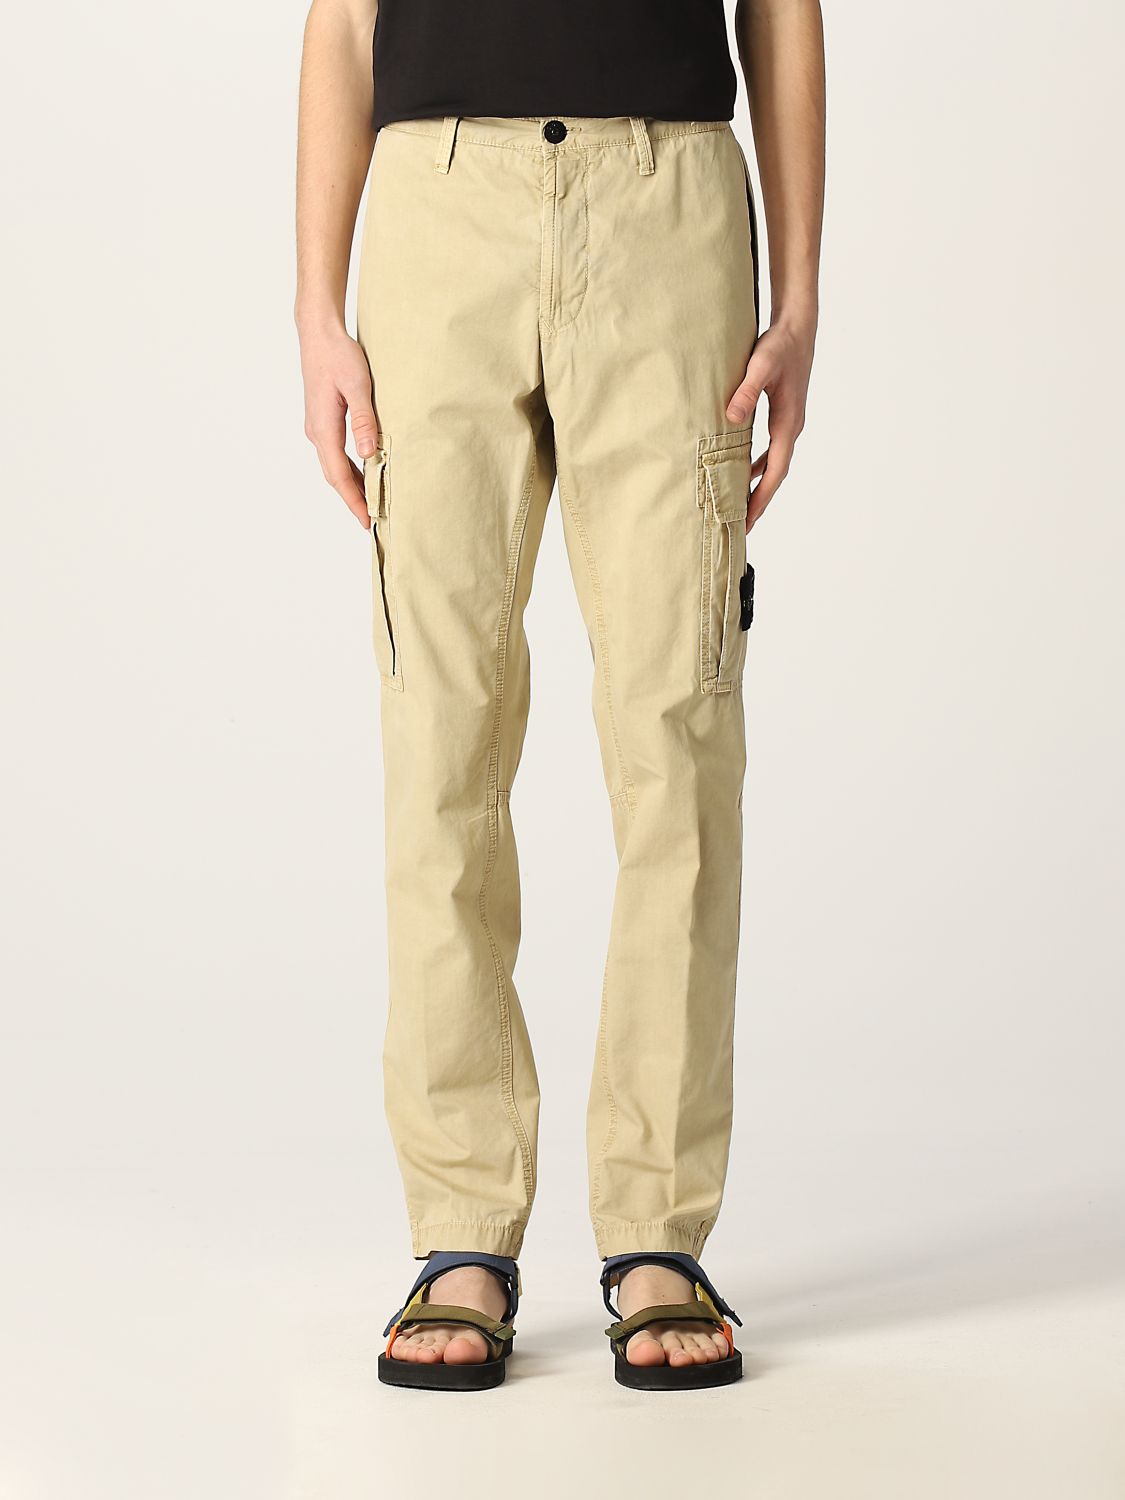 STONE ISLAND: pants in brushed cotton canvas - Beige | Stone